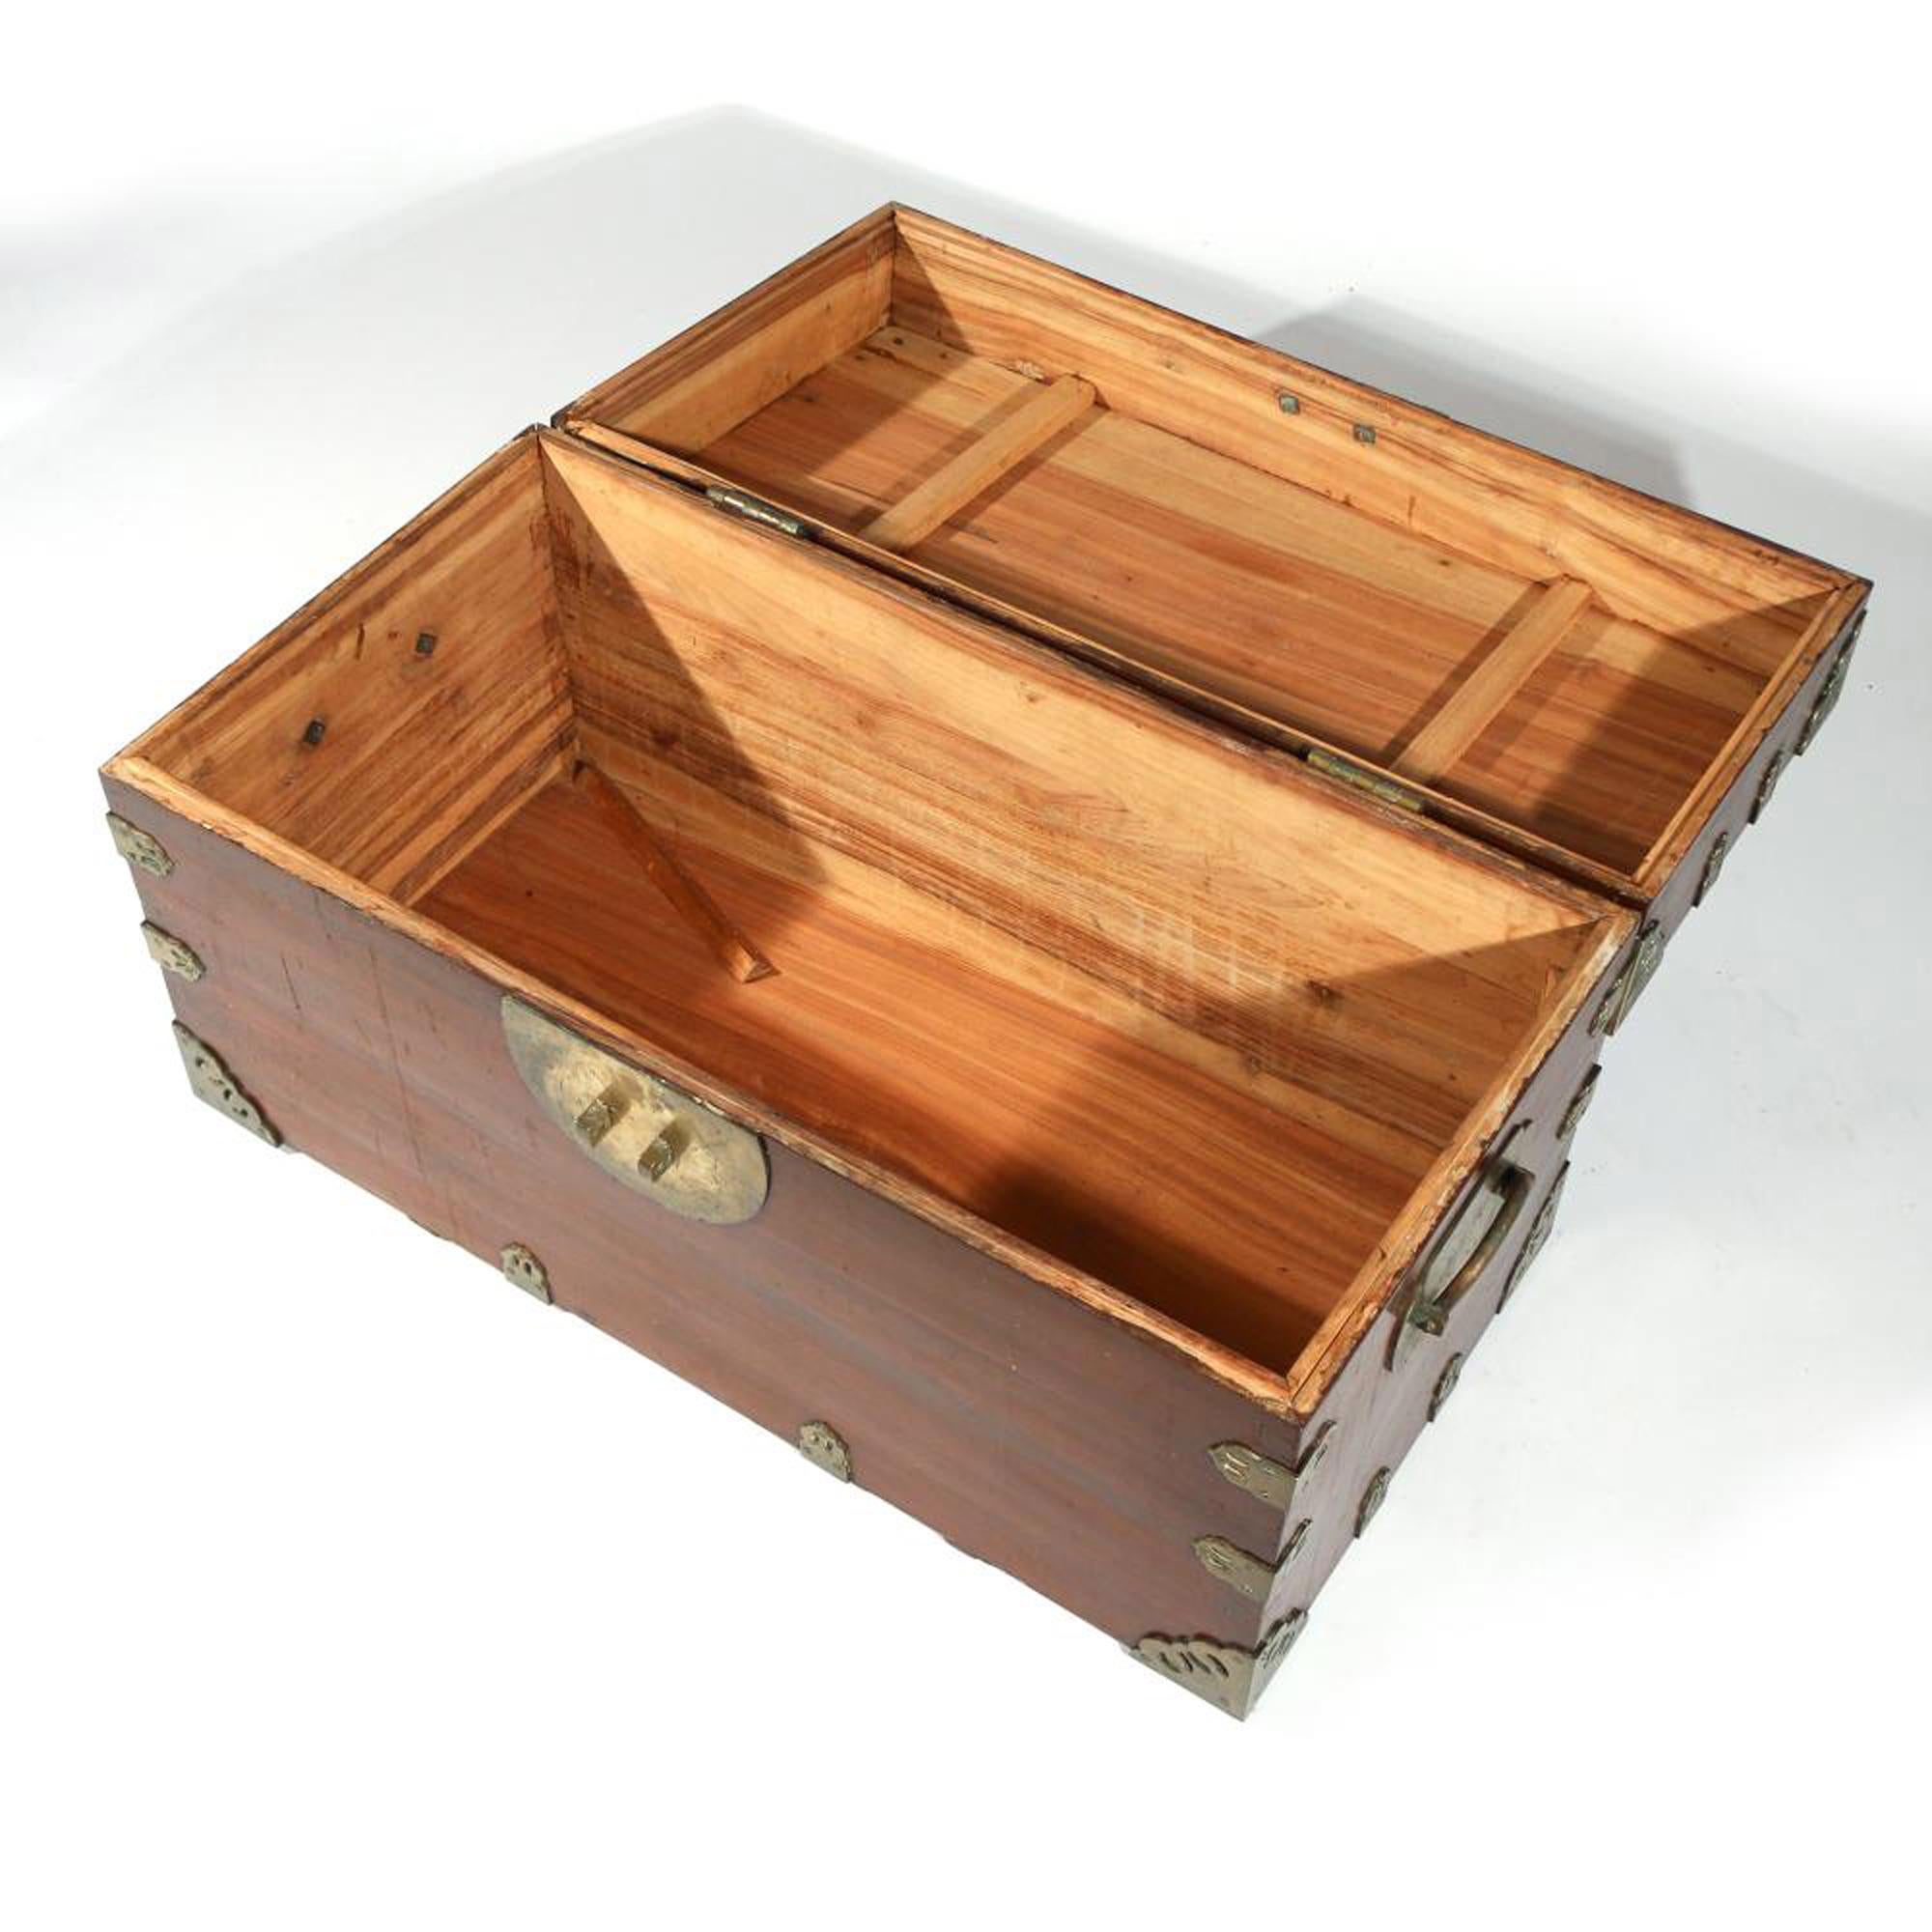 Chinese Export Chinese Camphor Wood Sailor's Large Brass-Bound Sea or Campaign Chest & Lock For Sale